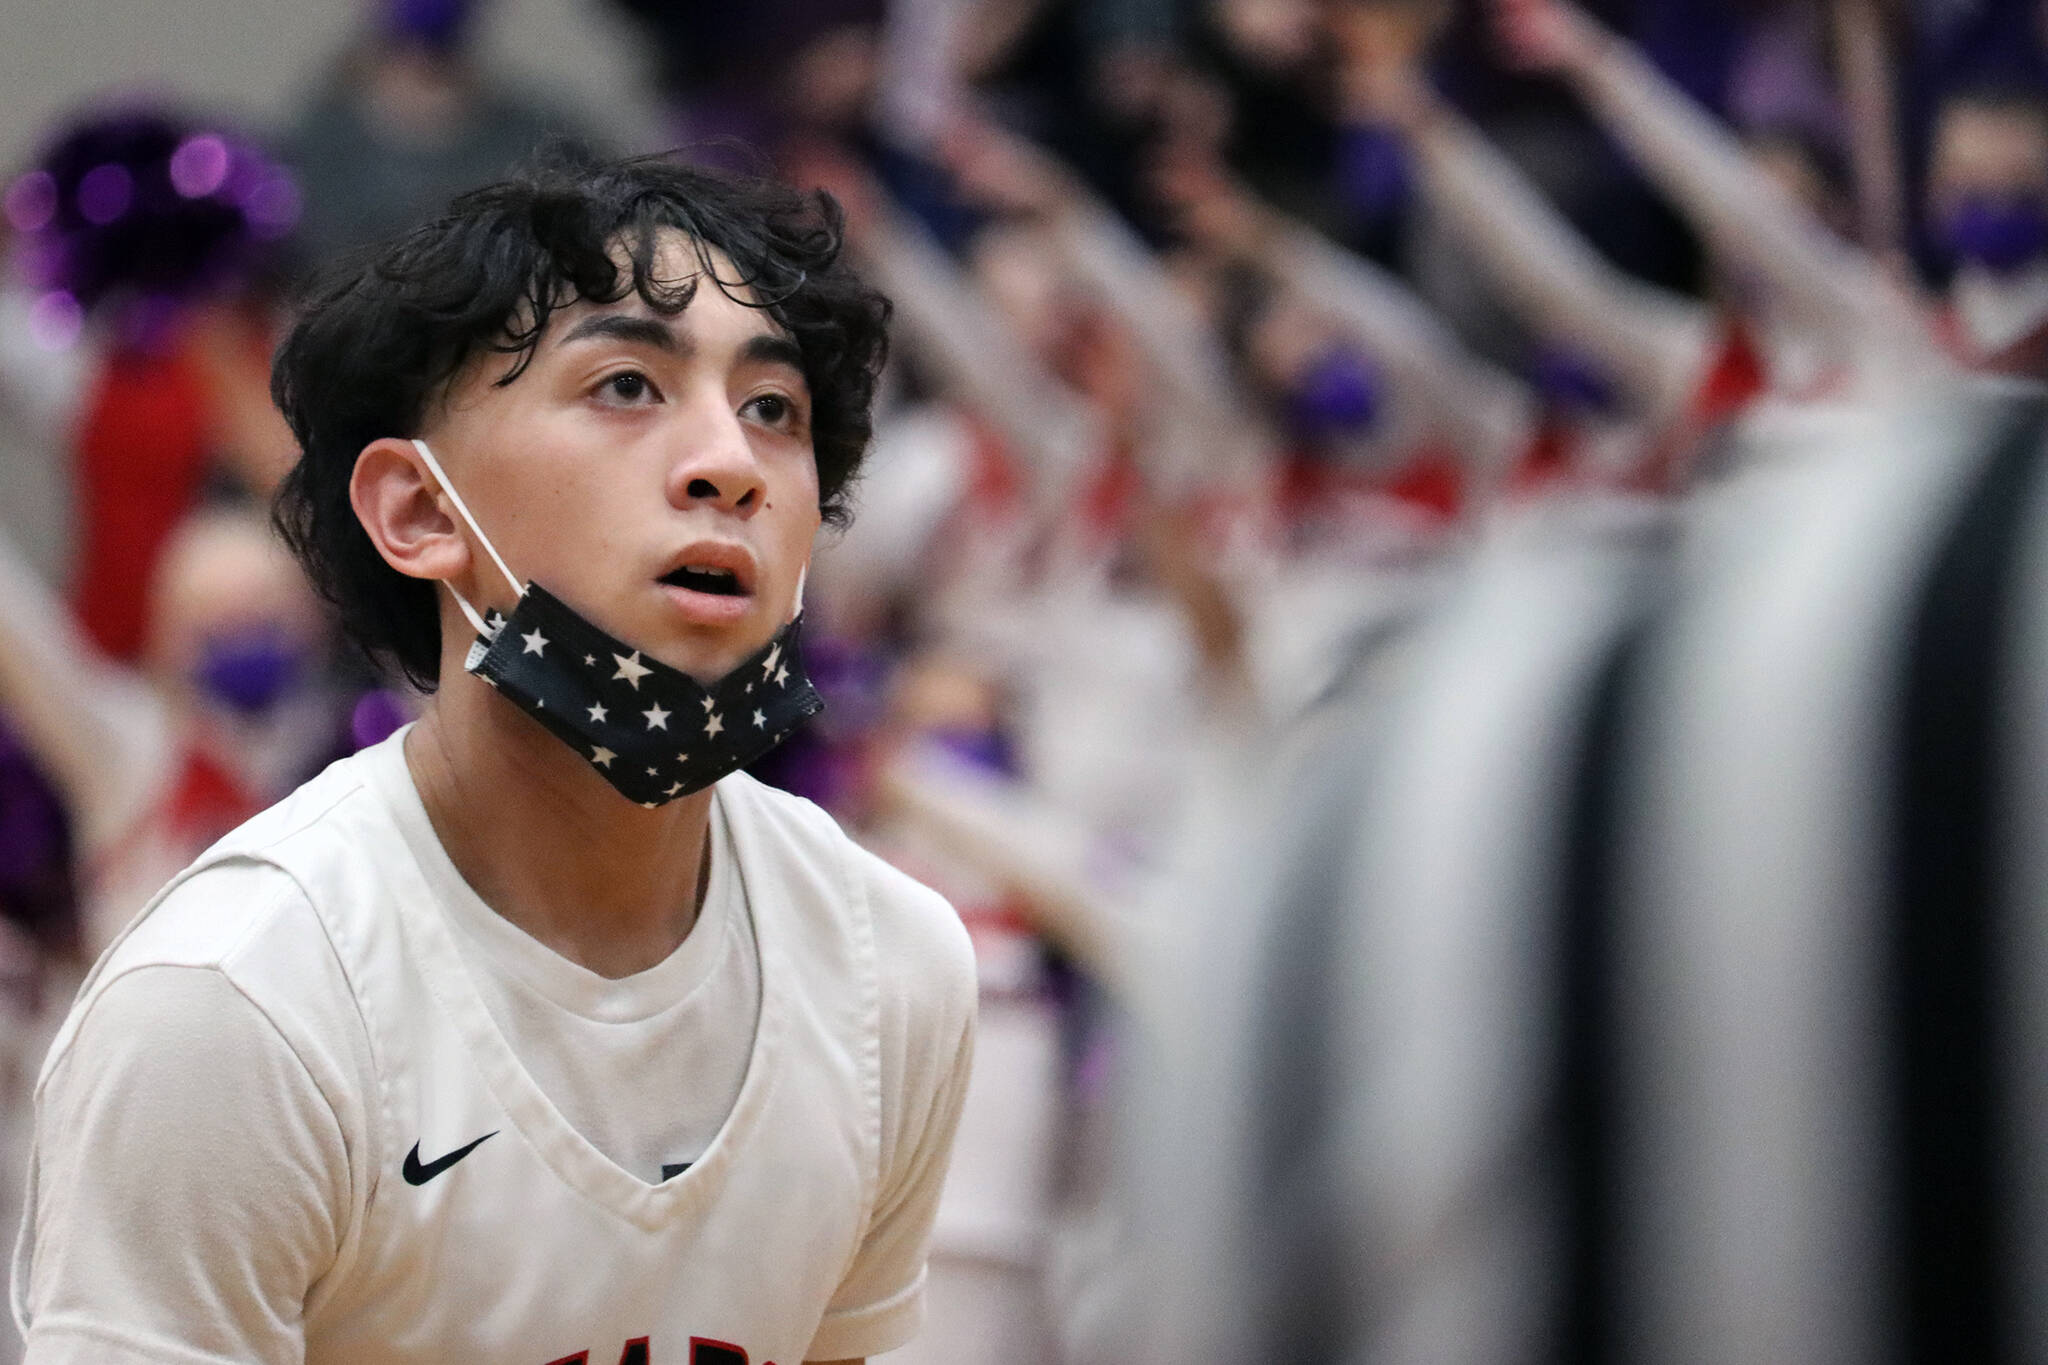 Ben Hohenstatt / Juneau Empire
JDHS’ Alwen Carrillo eyes the basket ahead of a free throw on Friday night. Carrillo’s 13 points, including 11 in the first quarter, paced the Crimson Bears.